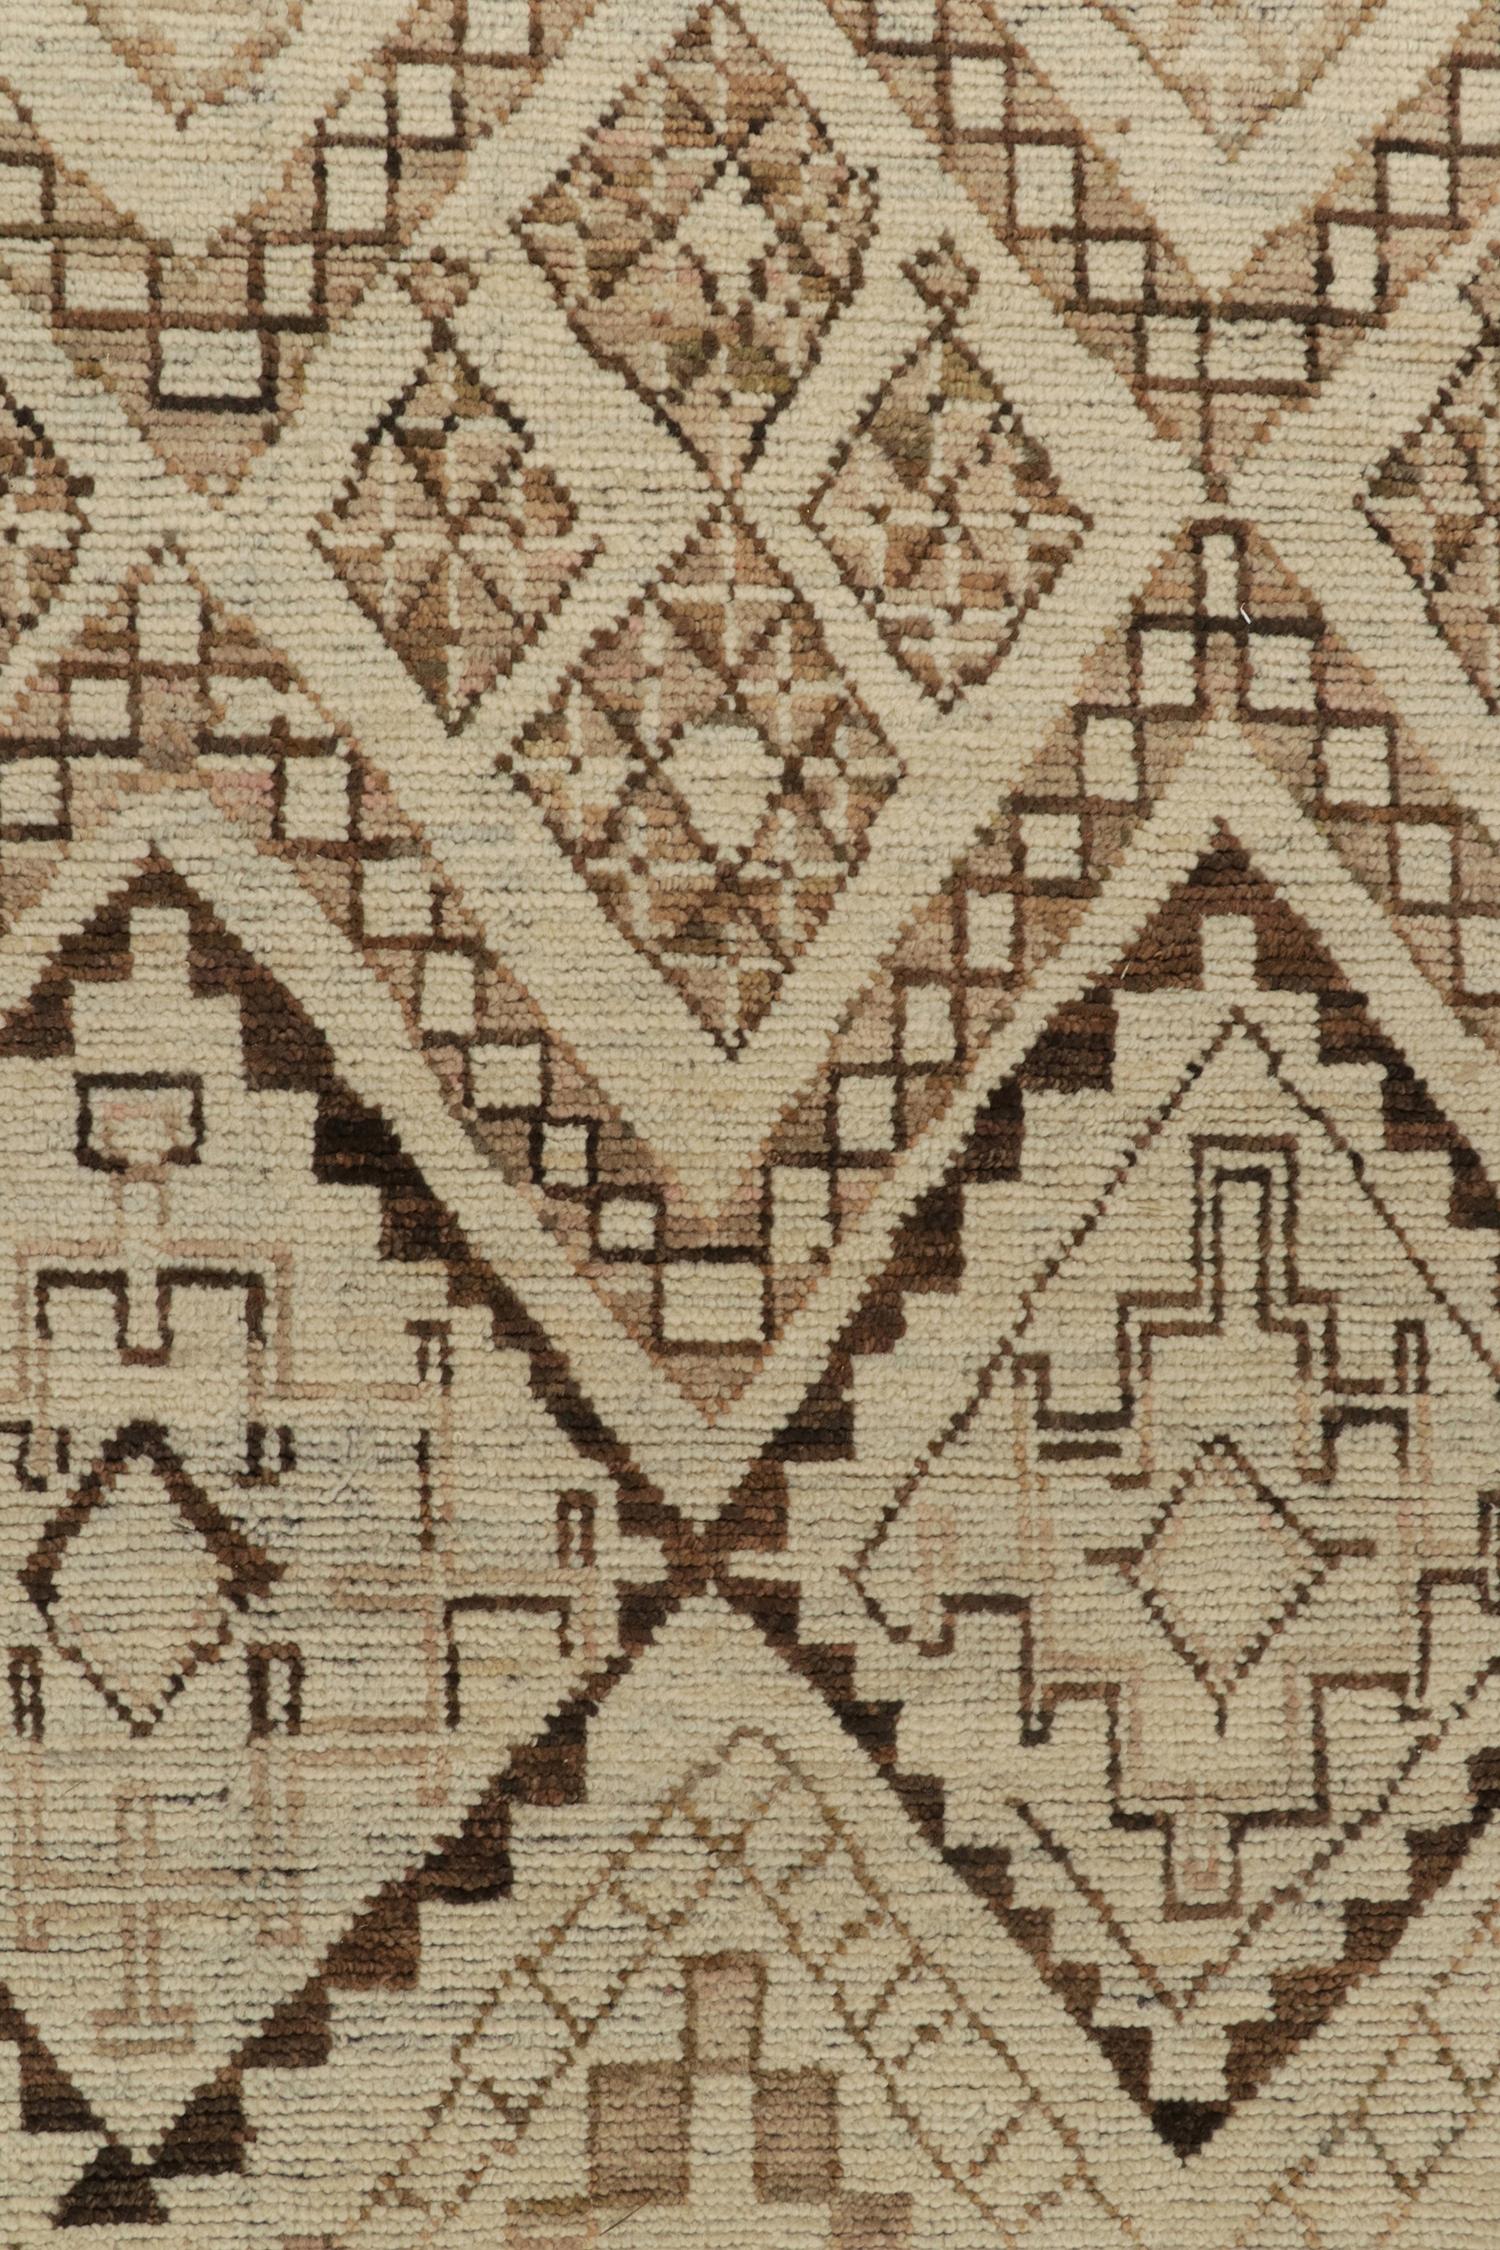 Contemporary Rug & Kilim’s Moroccan Style Rug in Beige-Brown Tribal Geometric Patterns For Sale